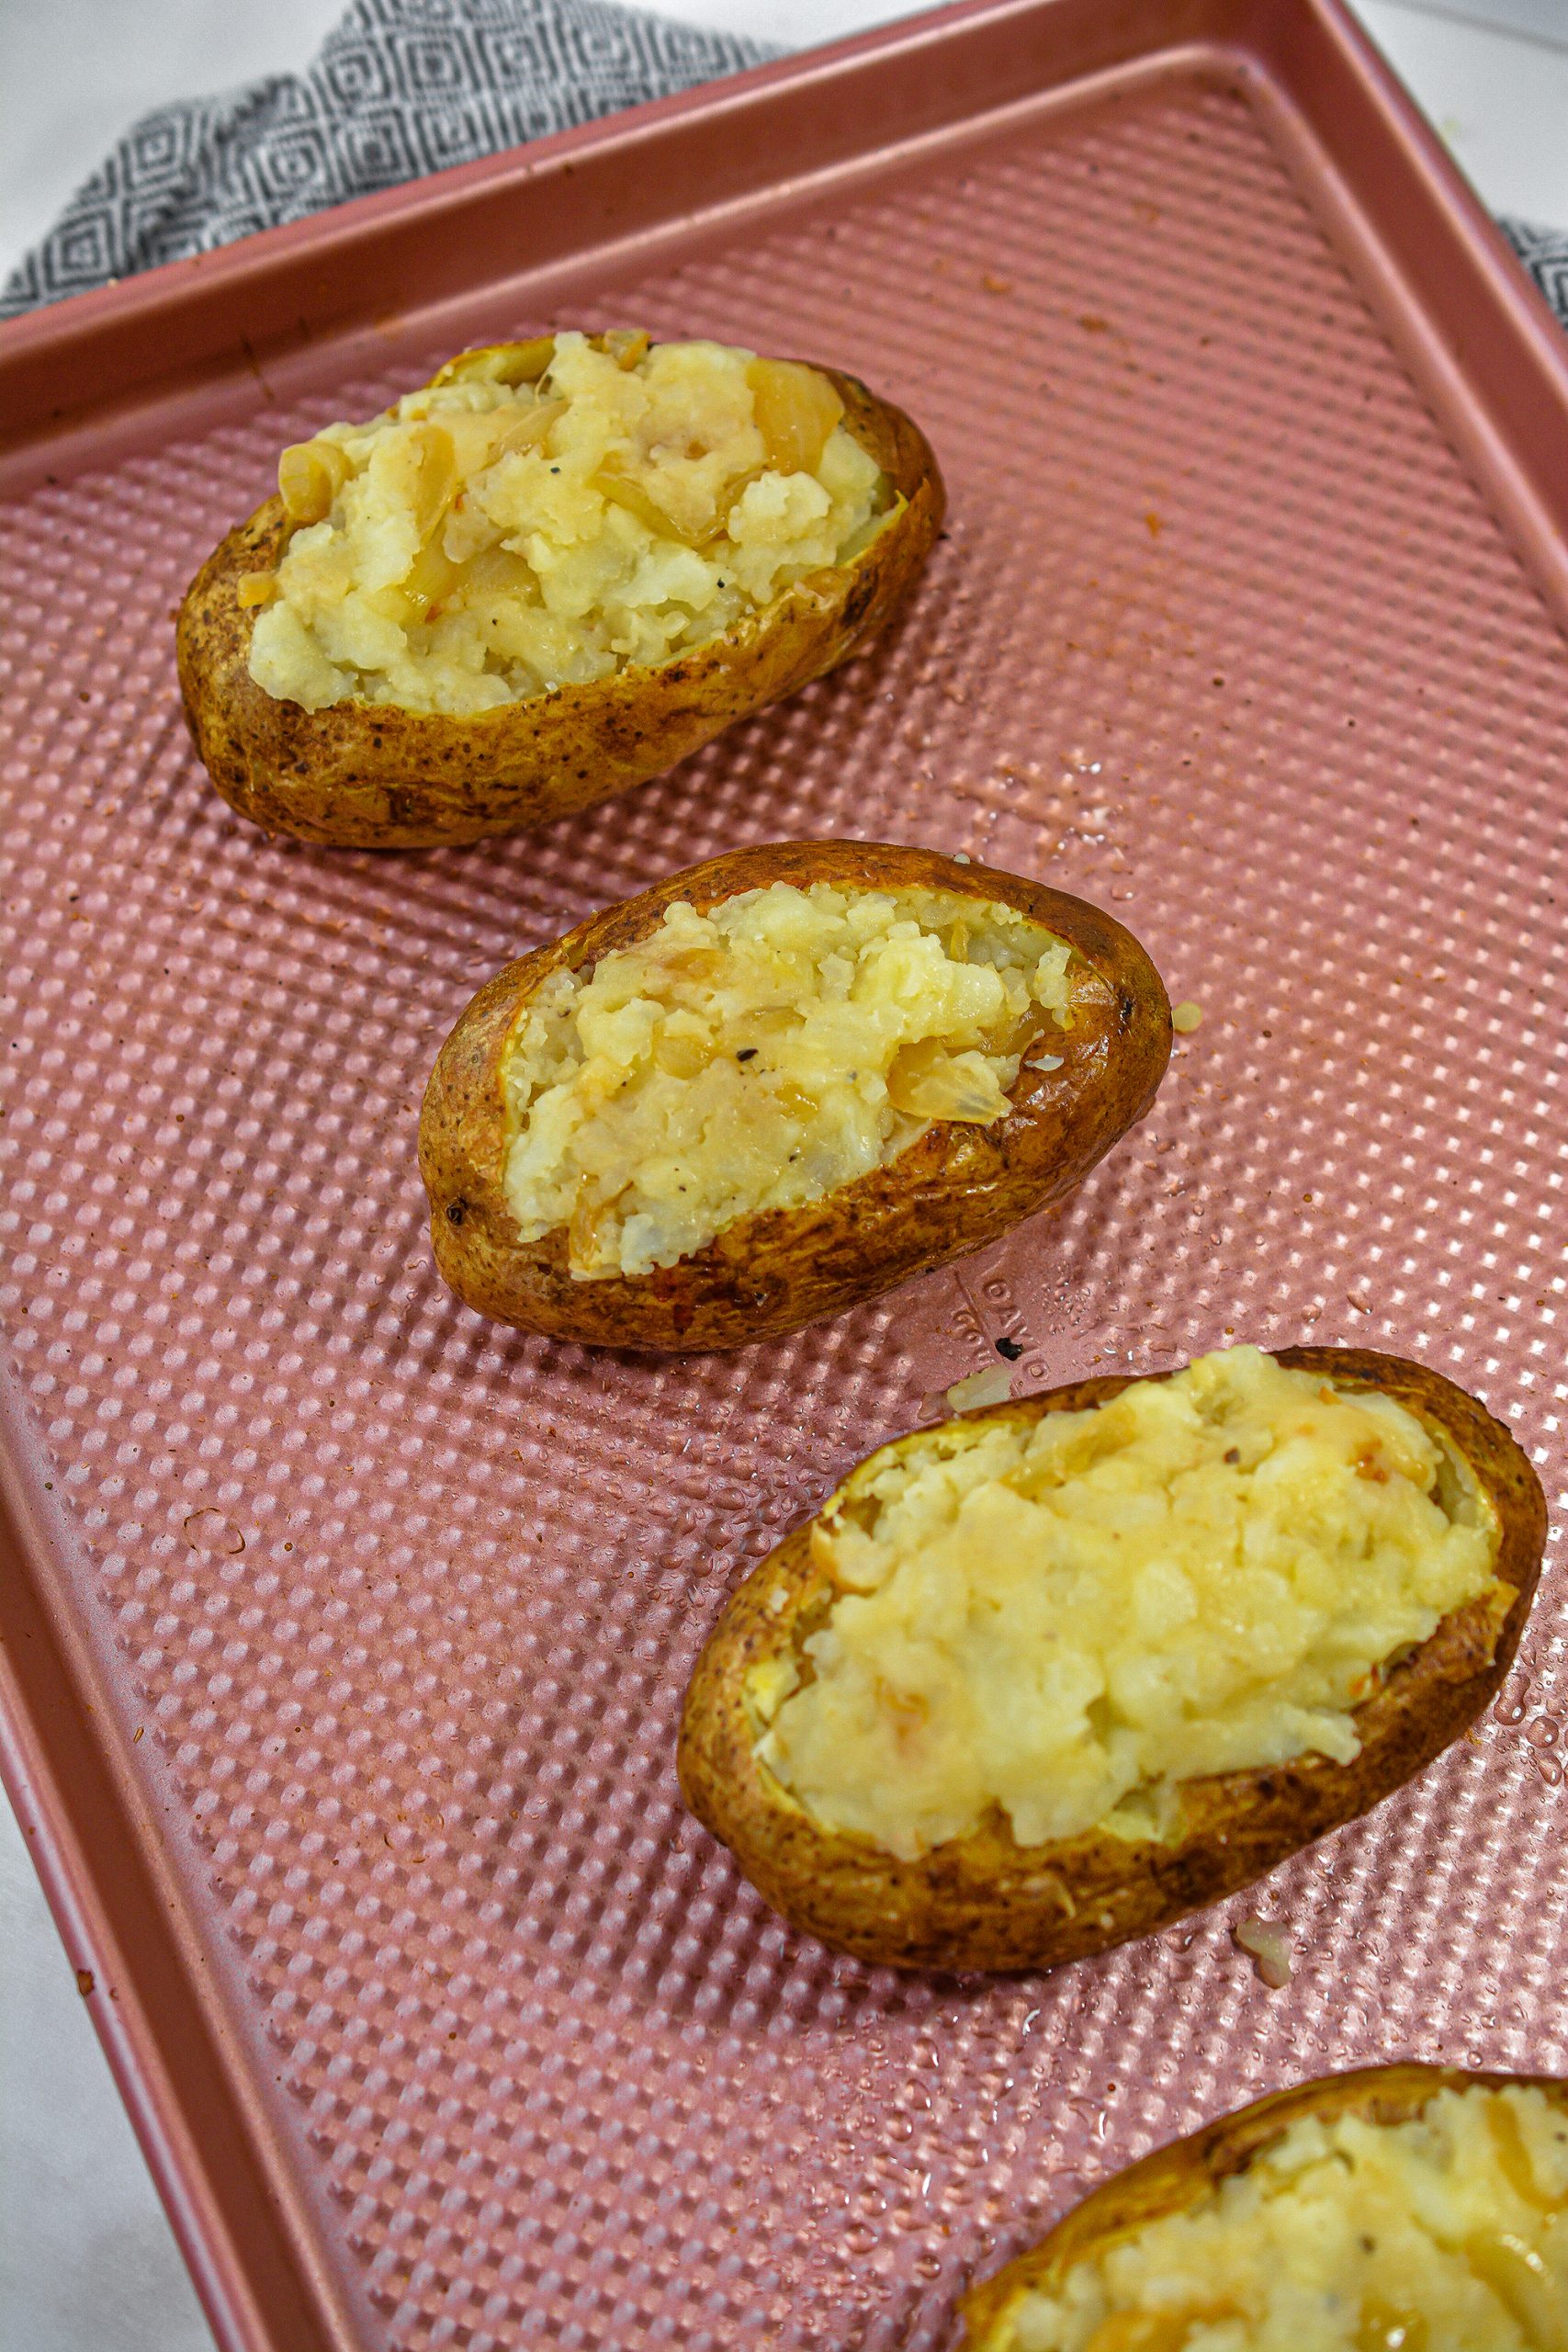 Stuff the potatoes with the filling and top with the remaining onion mixture and shredded cheese.